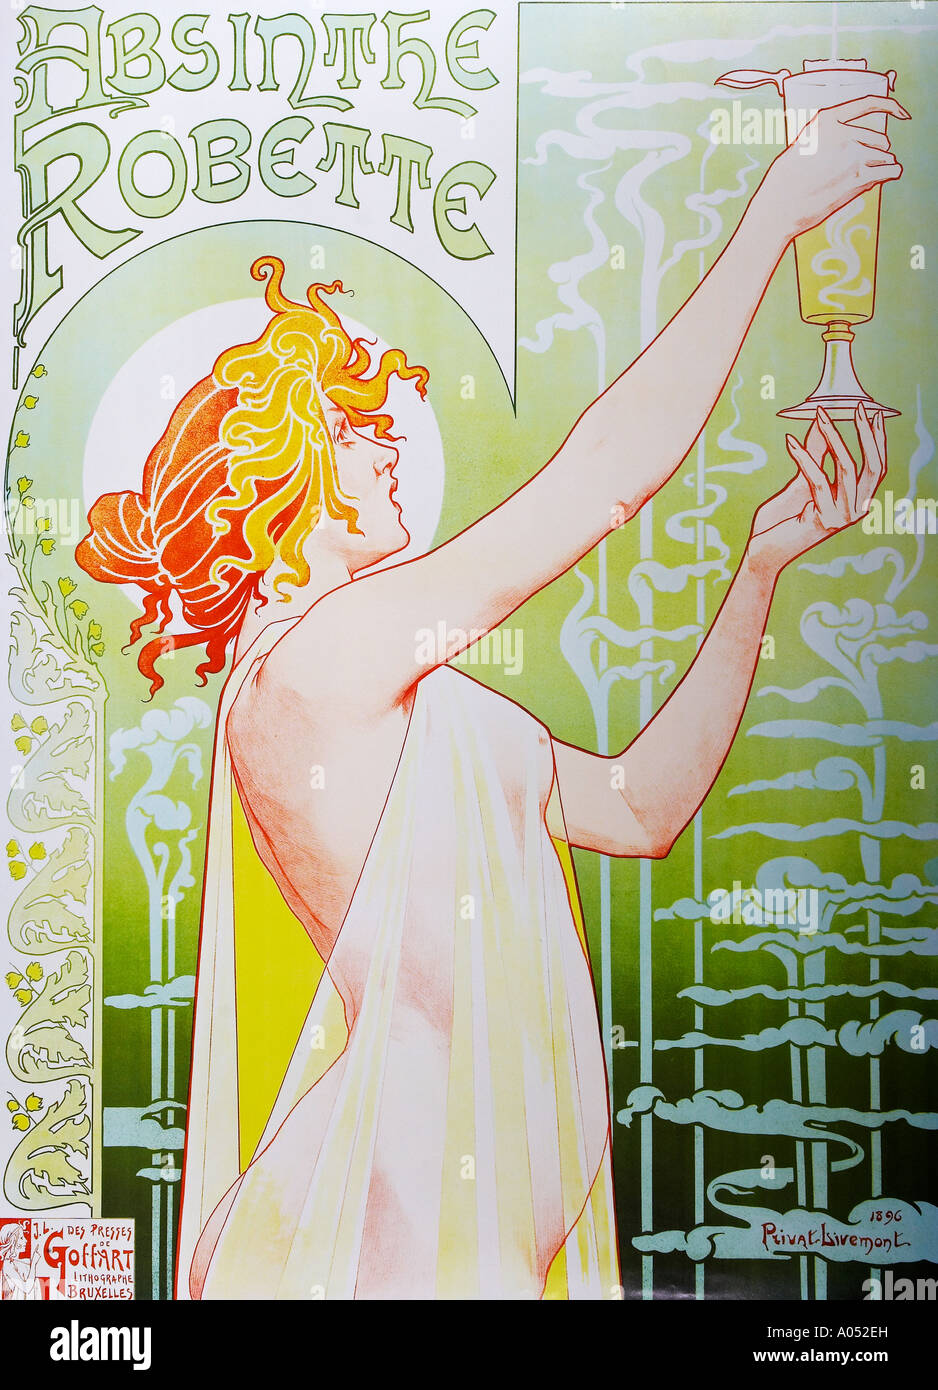 Poster depicting Absinthe Robette by the Belgian posterist Henri Privat Livemont Stock Photo